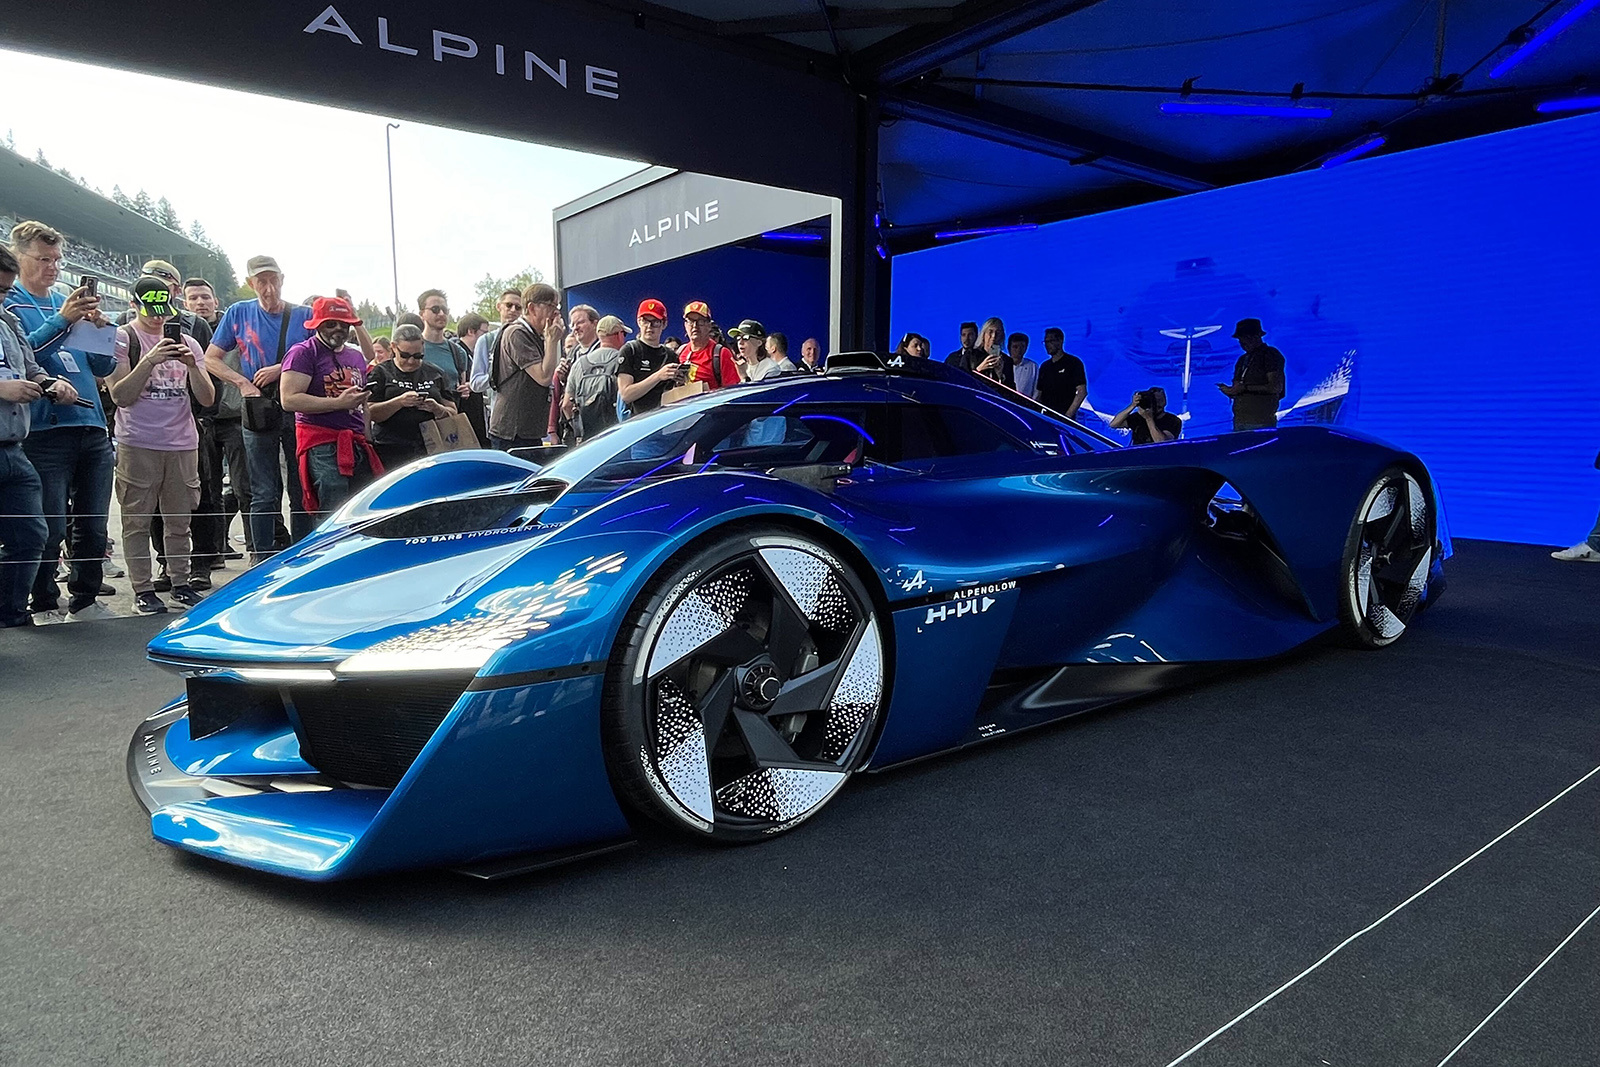 Alpine's New Hydrogen-Powered Car: A High-Performance Eco-Friendly Drive Coming to the U.S.